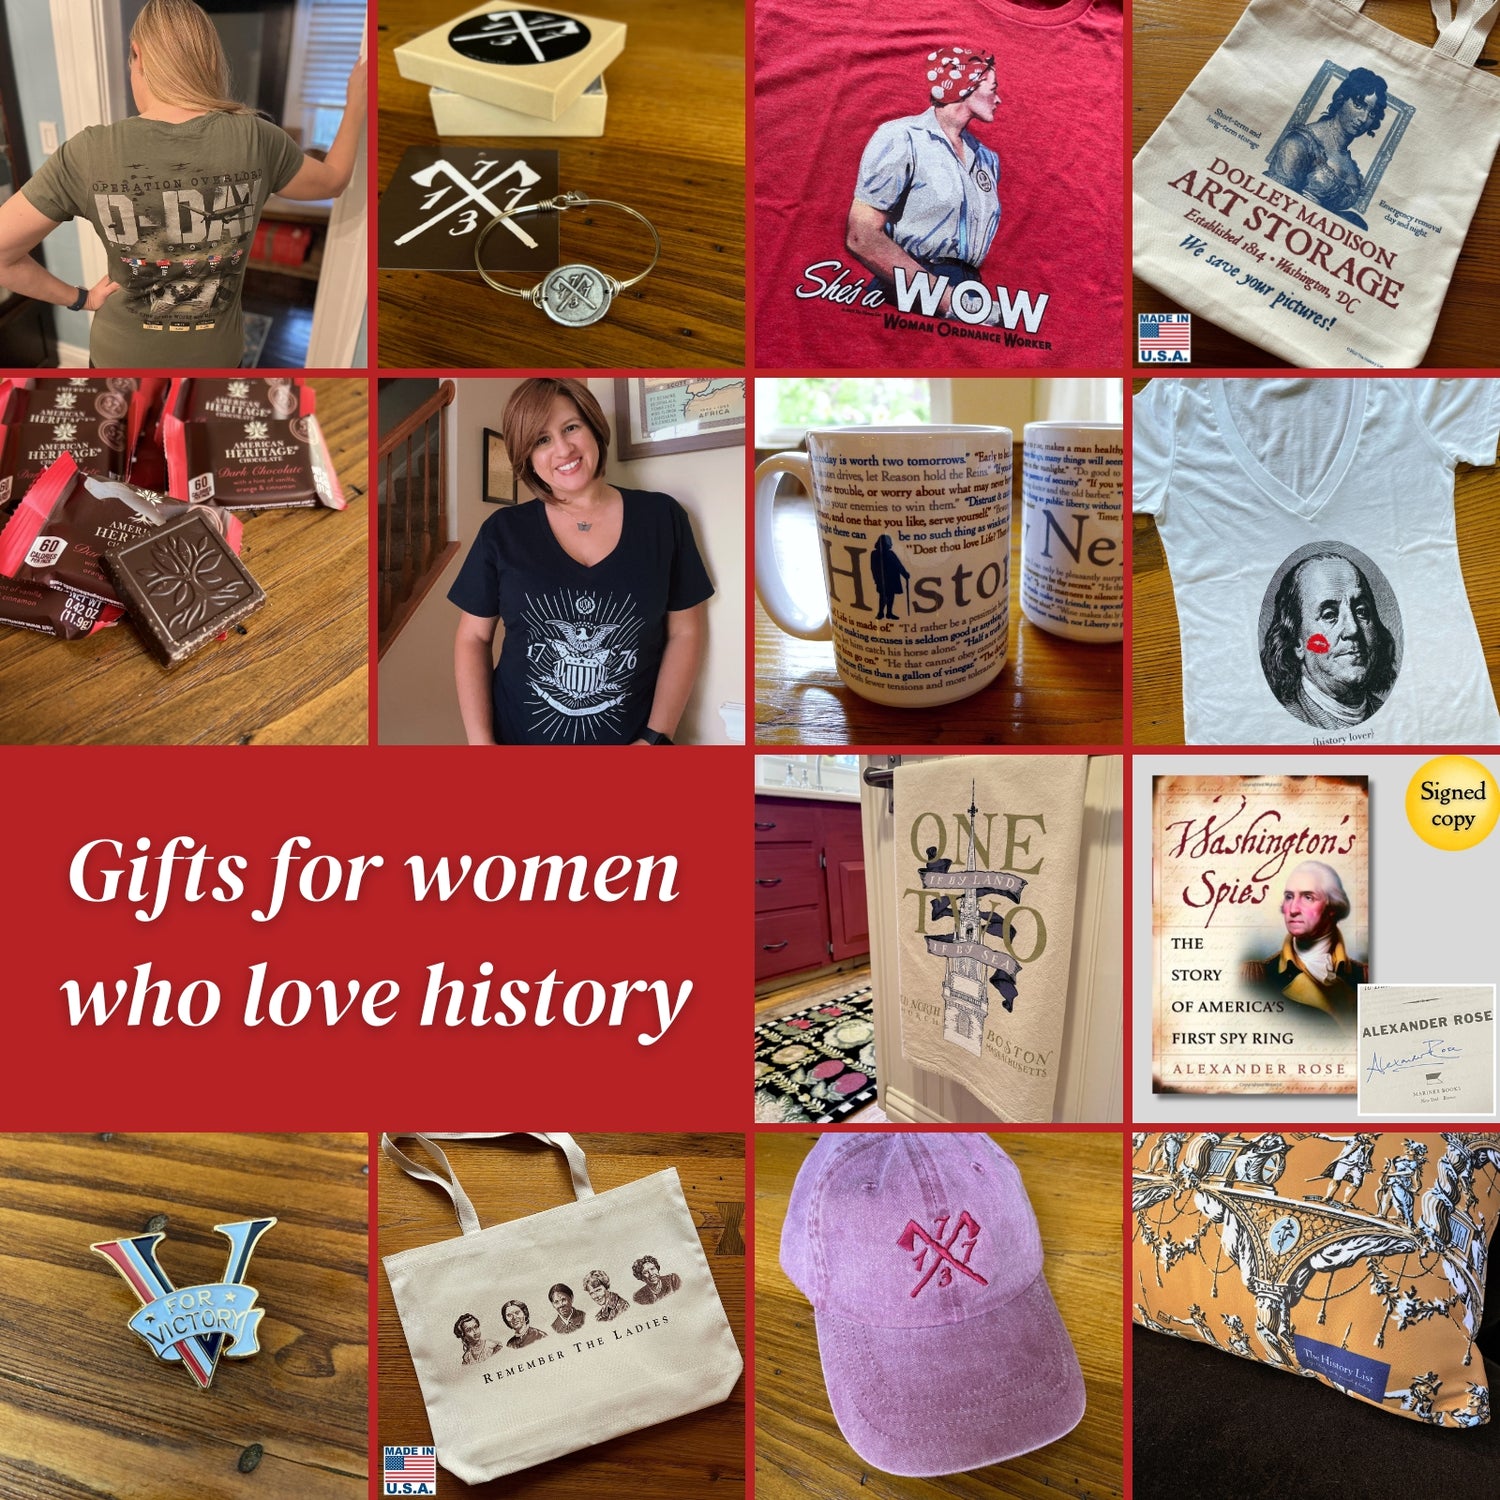 Gifts for women who love history